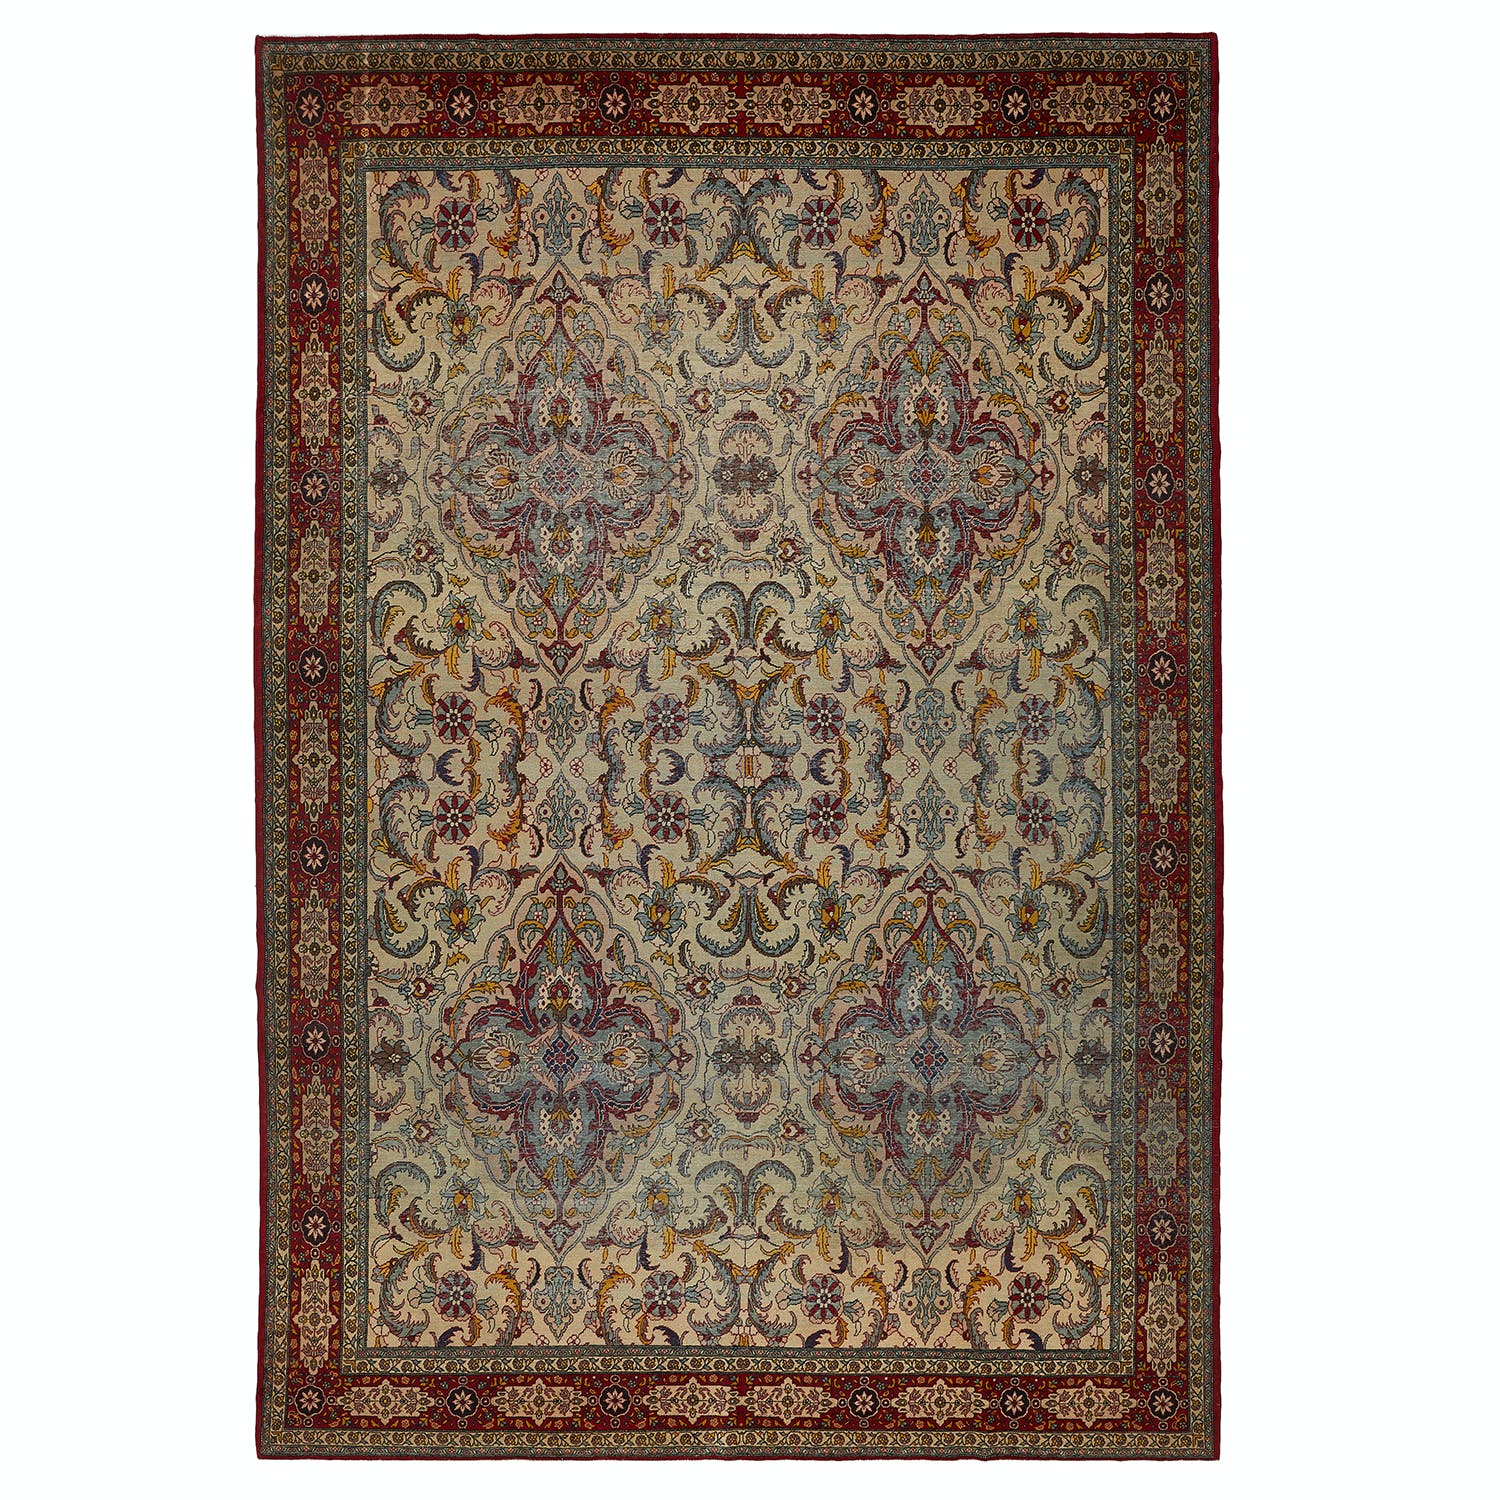 Ornate, symmetrical rug with intricate floral motifs in muted colors.